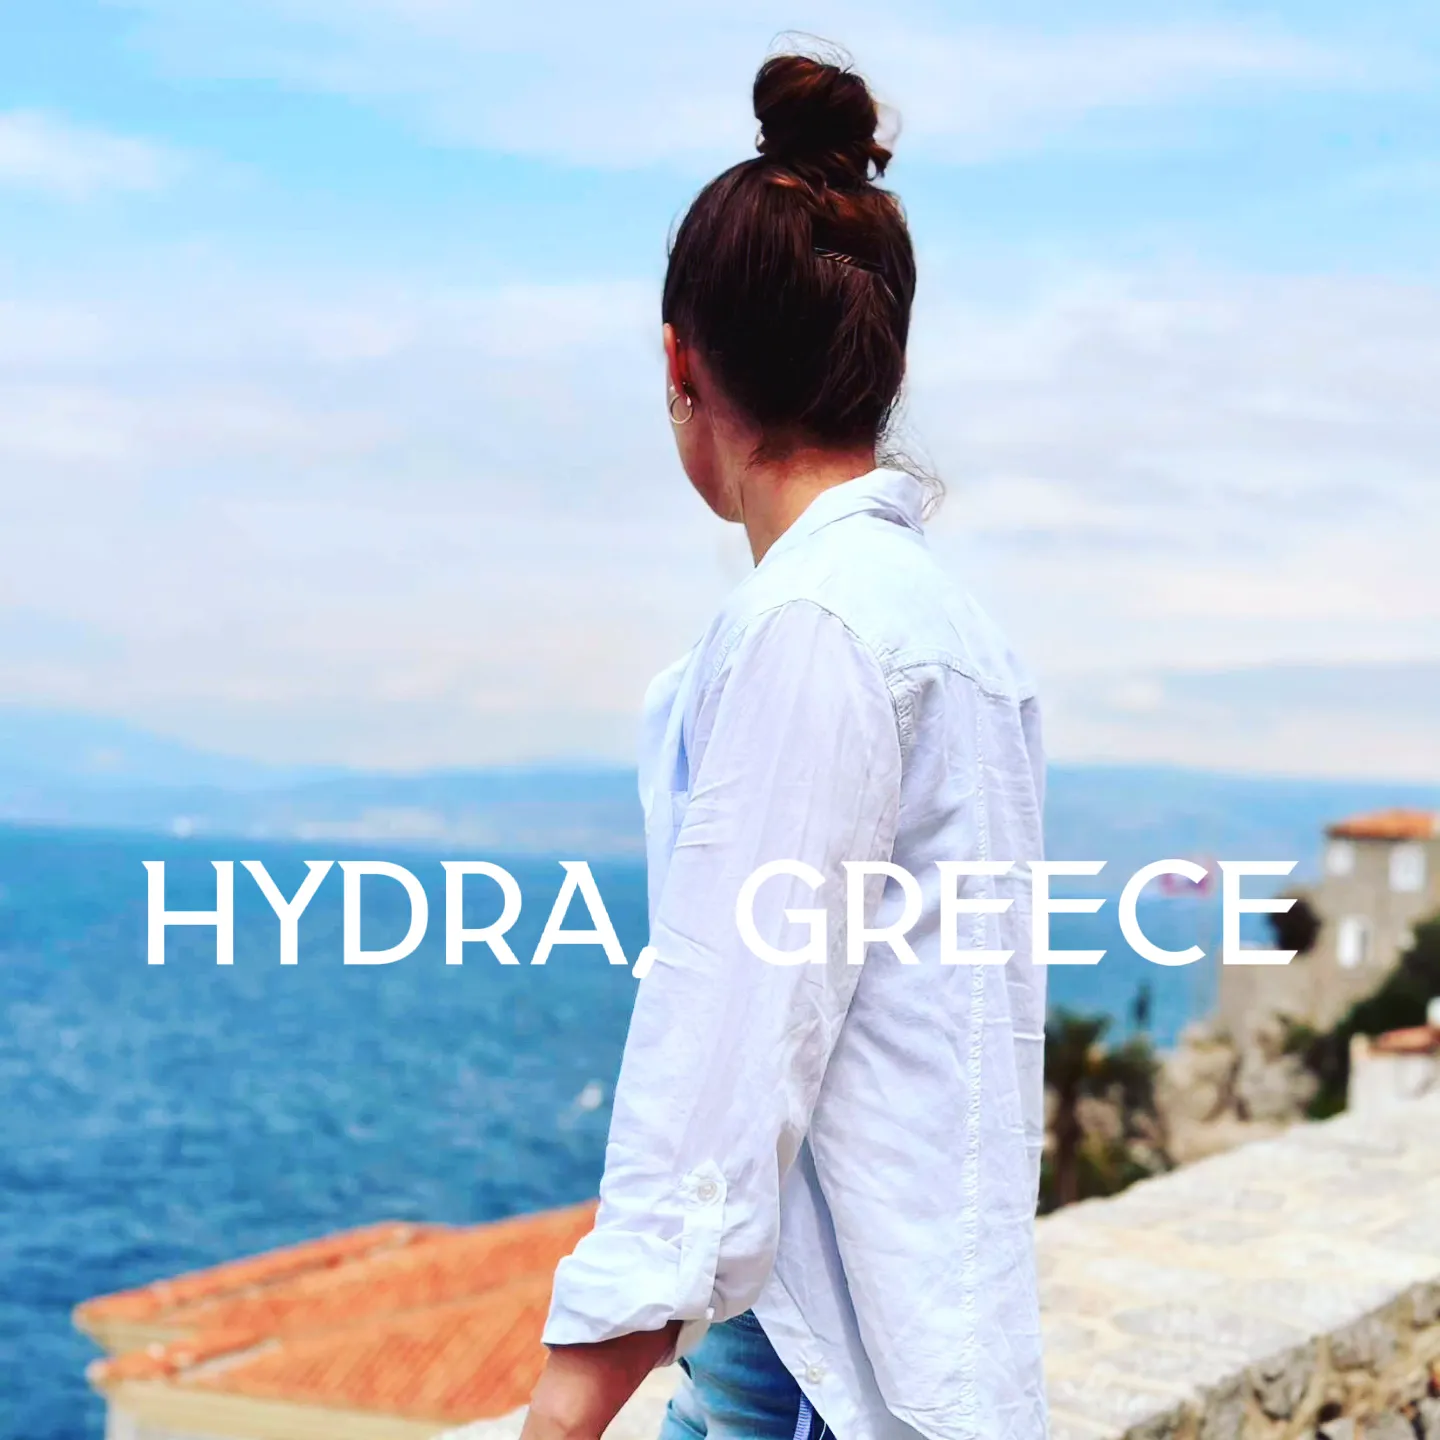 Hydra, Greece 🇬🇷, Gallery posted by Morgan Palmer